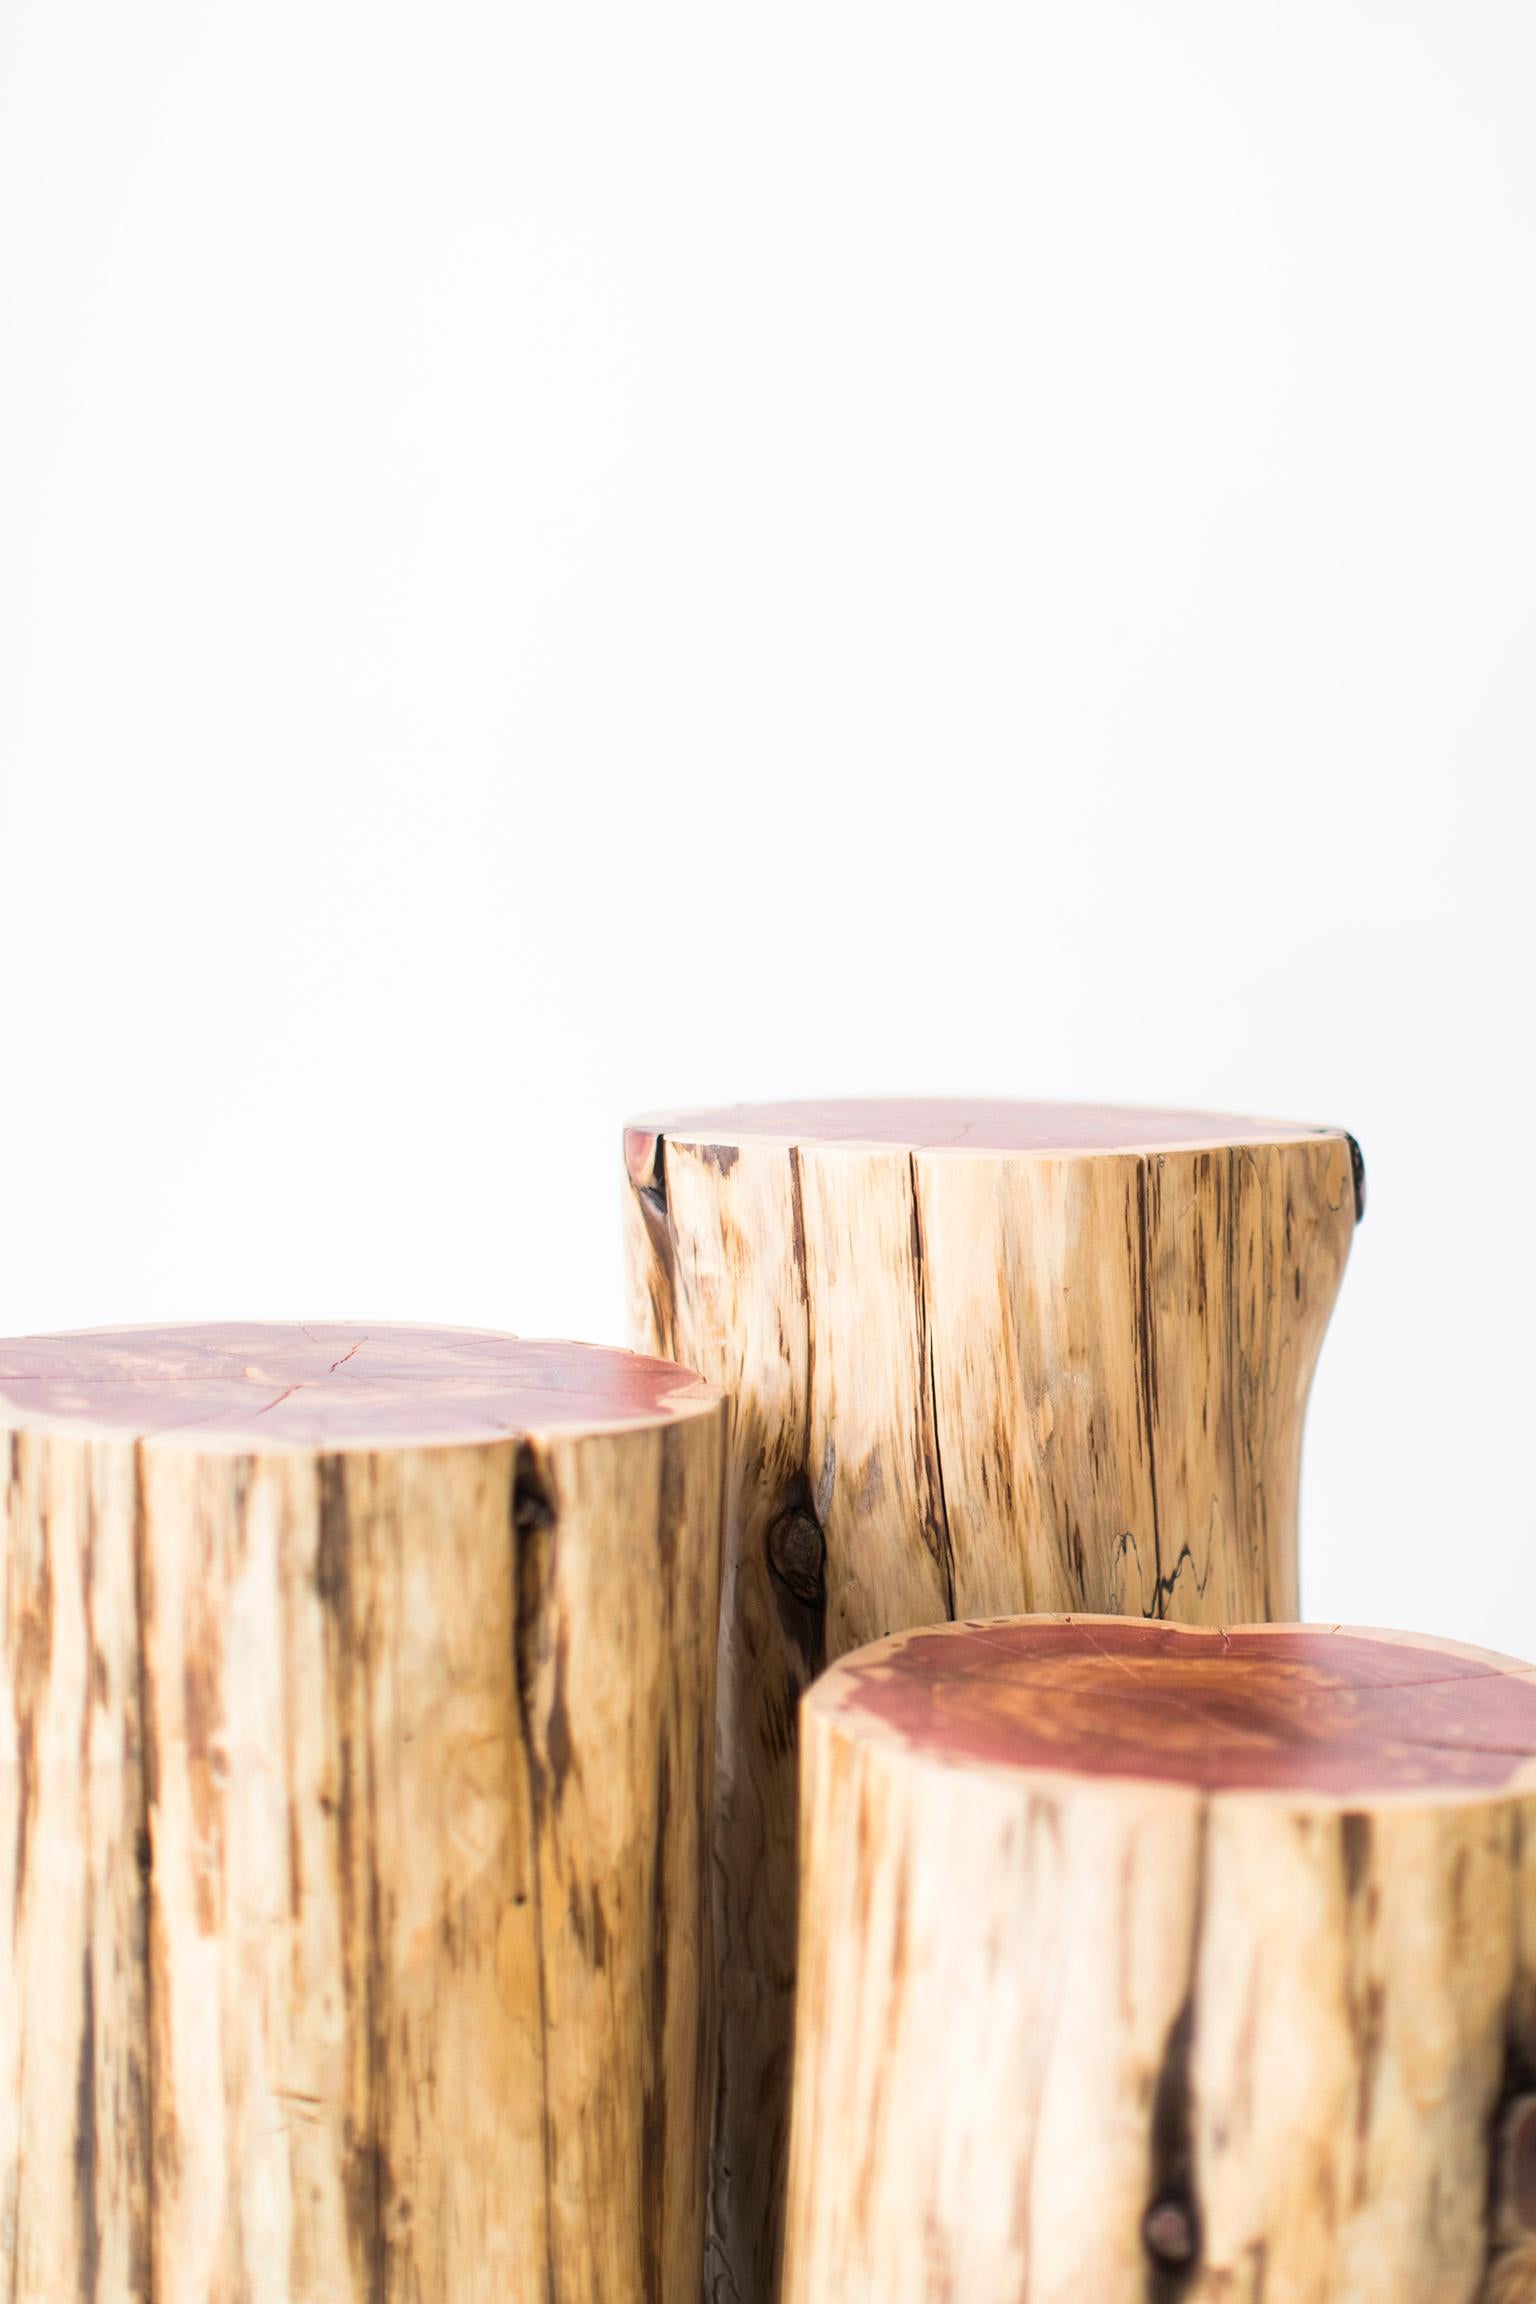 Please scroll down to read IMPORTANT INSTRUCTIONS ABOUT OUR STUMPS before purchase!

Why buy BERTU HOME stumps?

Kiln Dried
Our stumps all go through a drying process in our kiln, sometimes for up to a month. We are meticulous with bringing each and